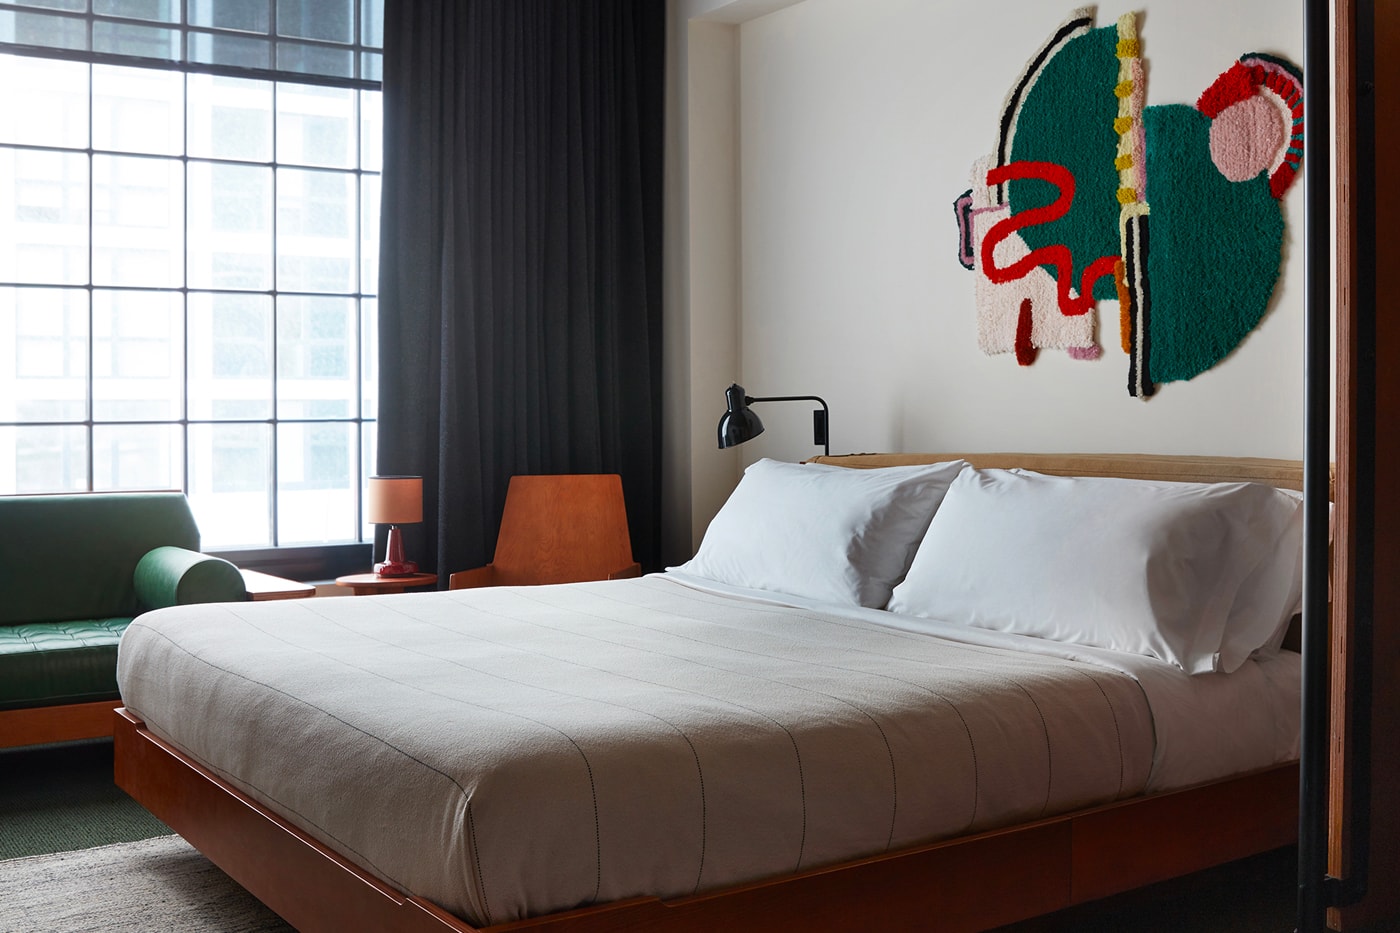 Ace Hotel Brooklyn Officially Open New York City Travel Design Best Hip Reservation le Corbusier barclays center botanic garden staycation vaycation workation getaway boreum hill news